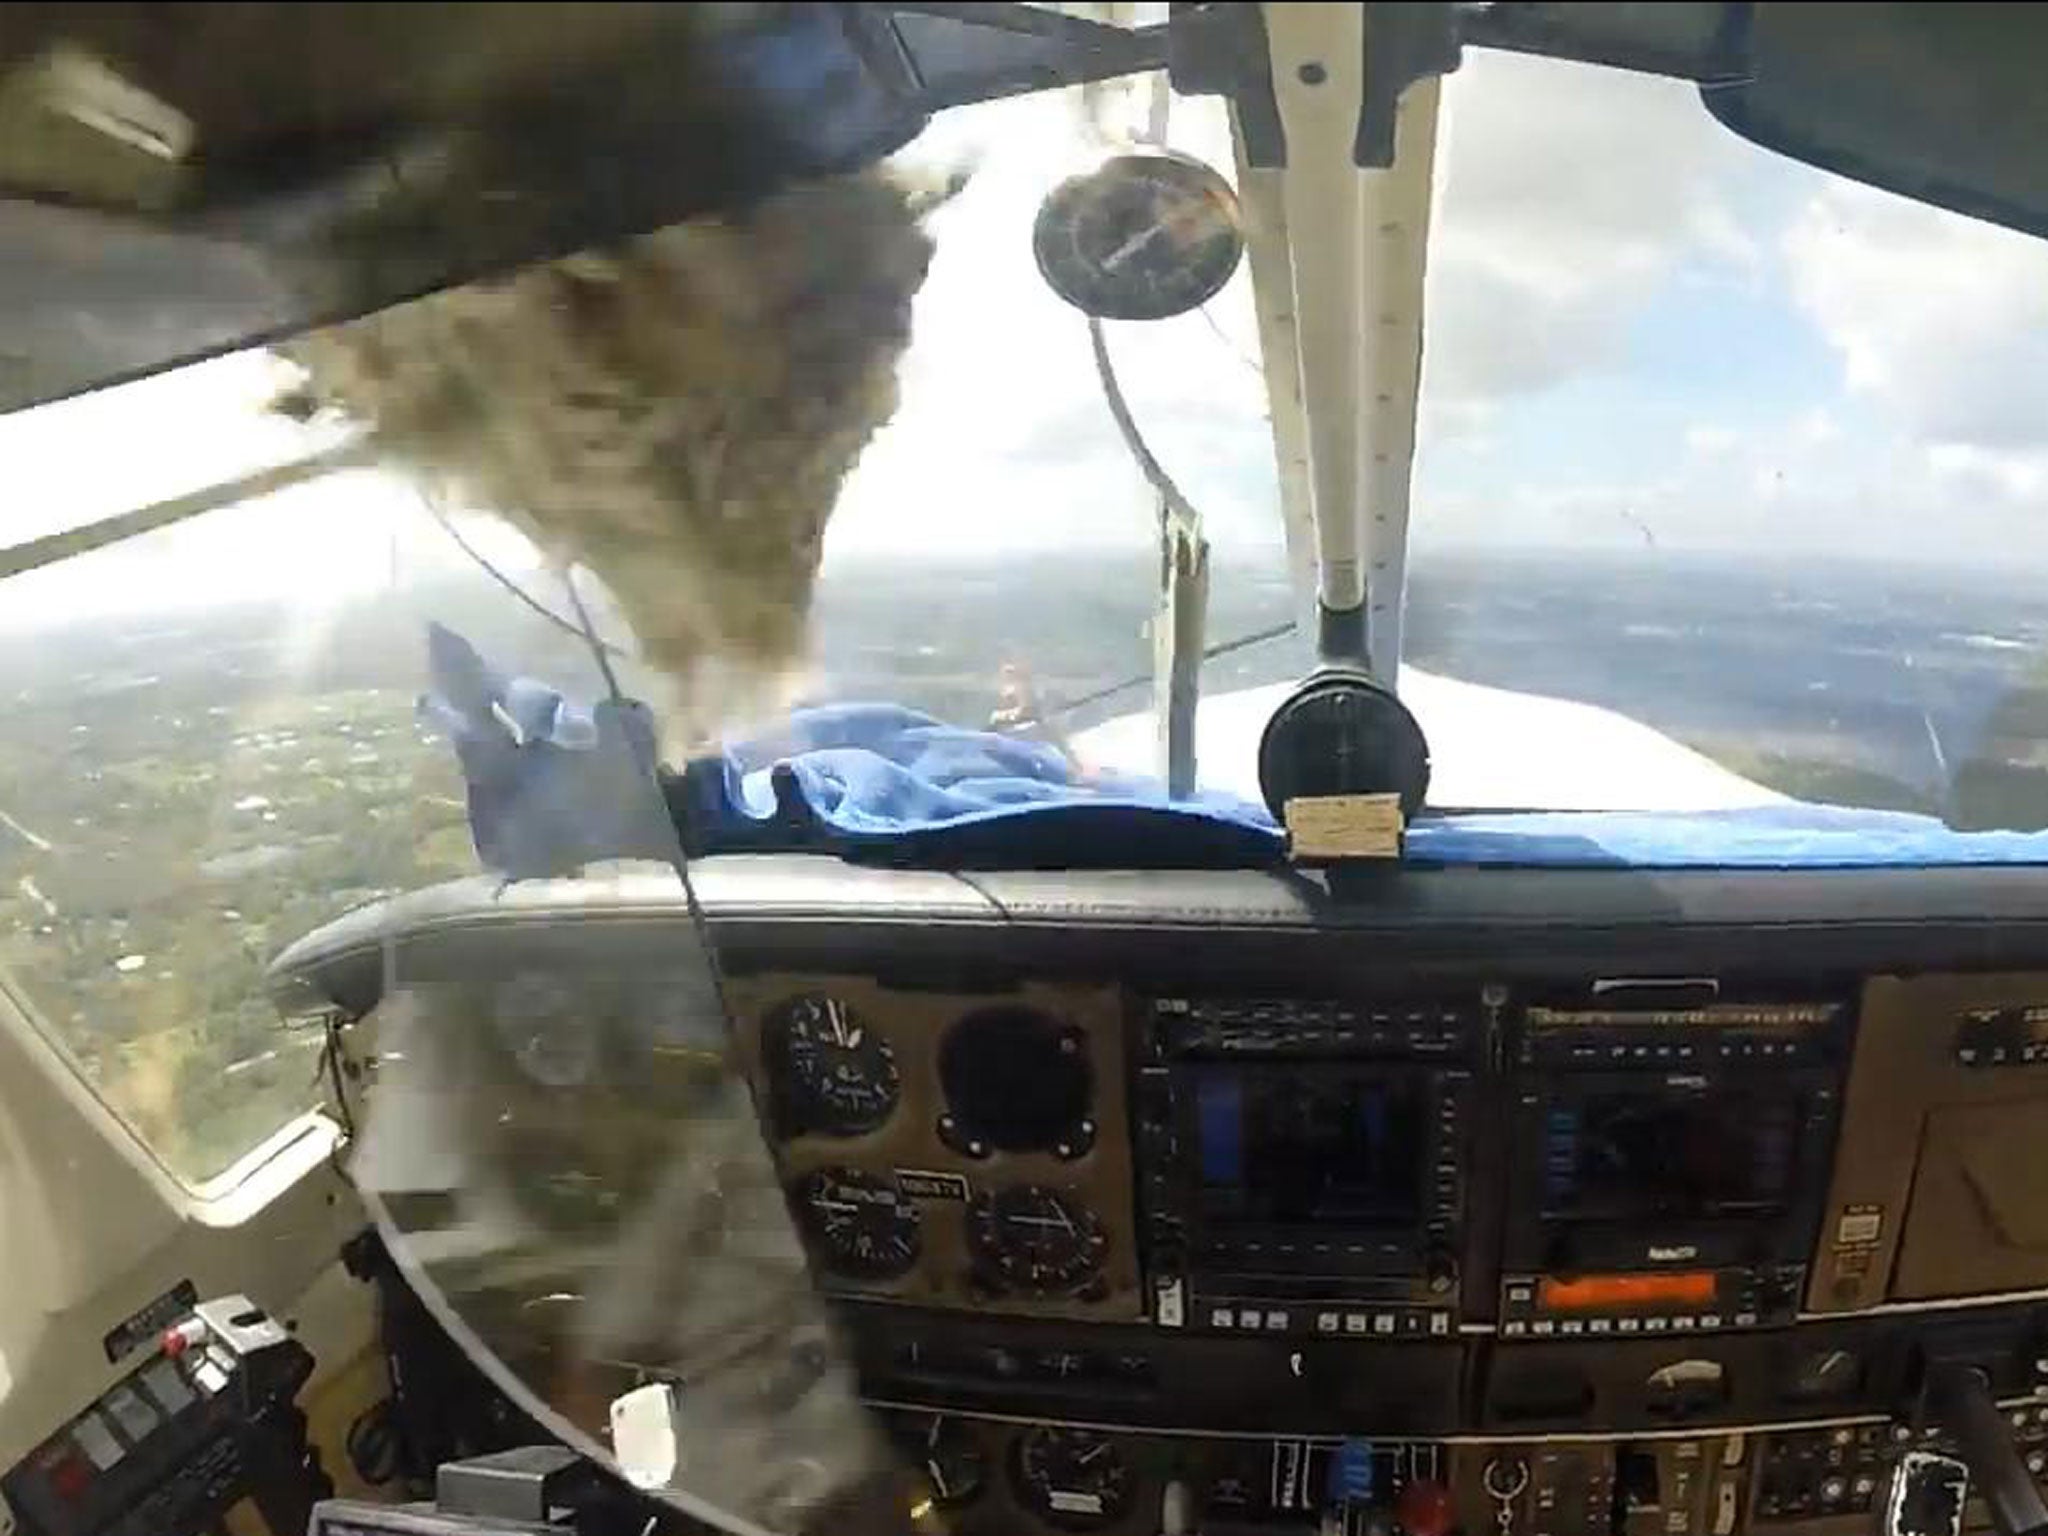 The moment a bird smashed into the windshield of Robert Weber's light aircraft